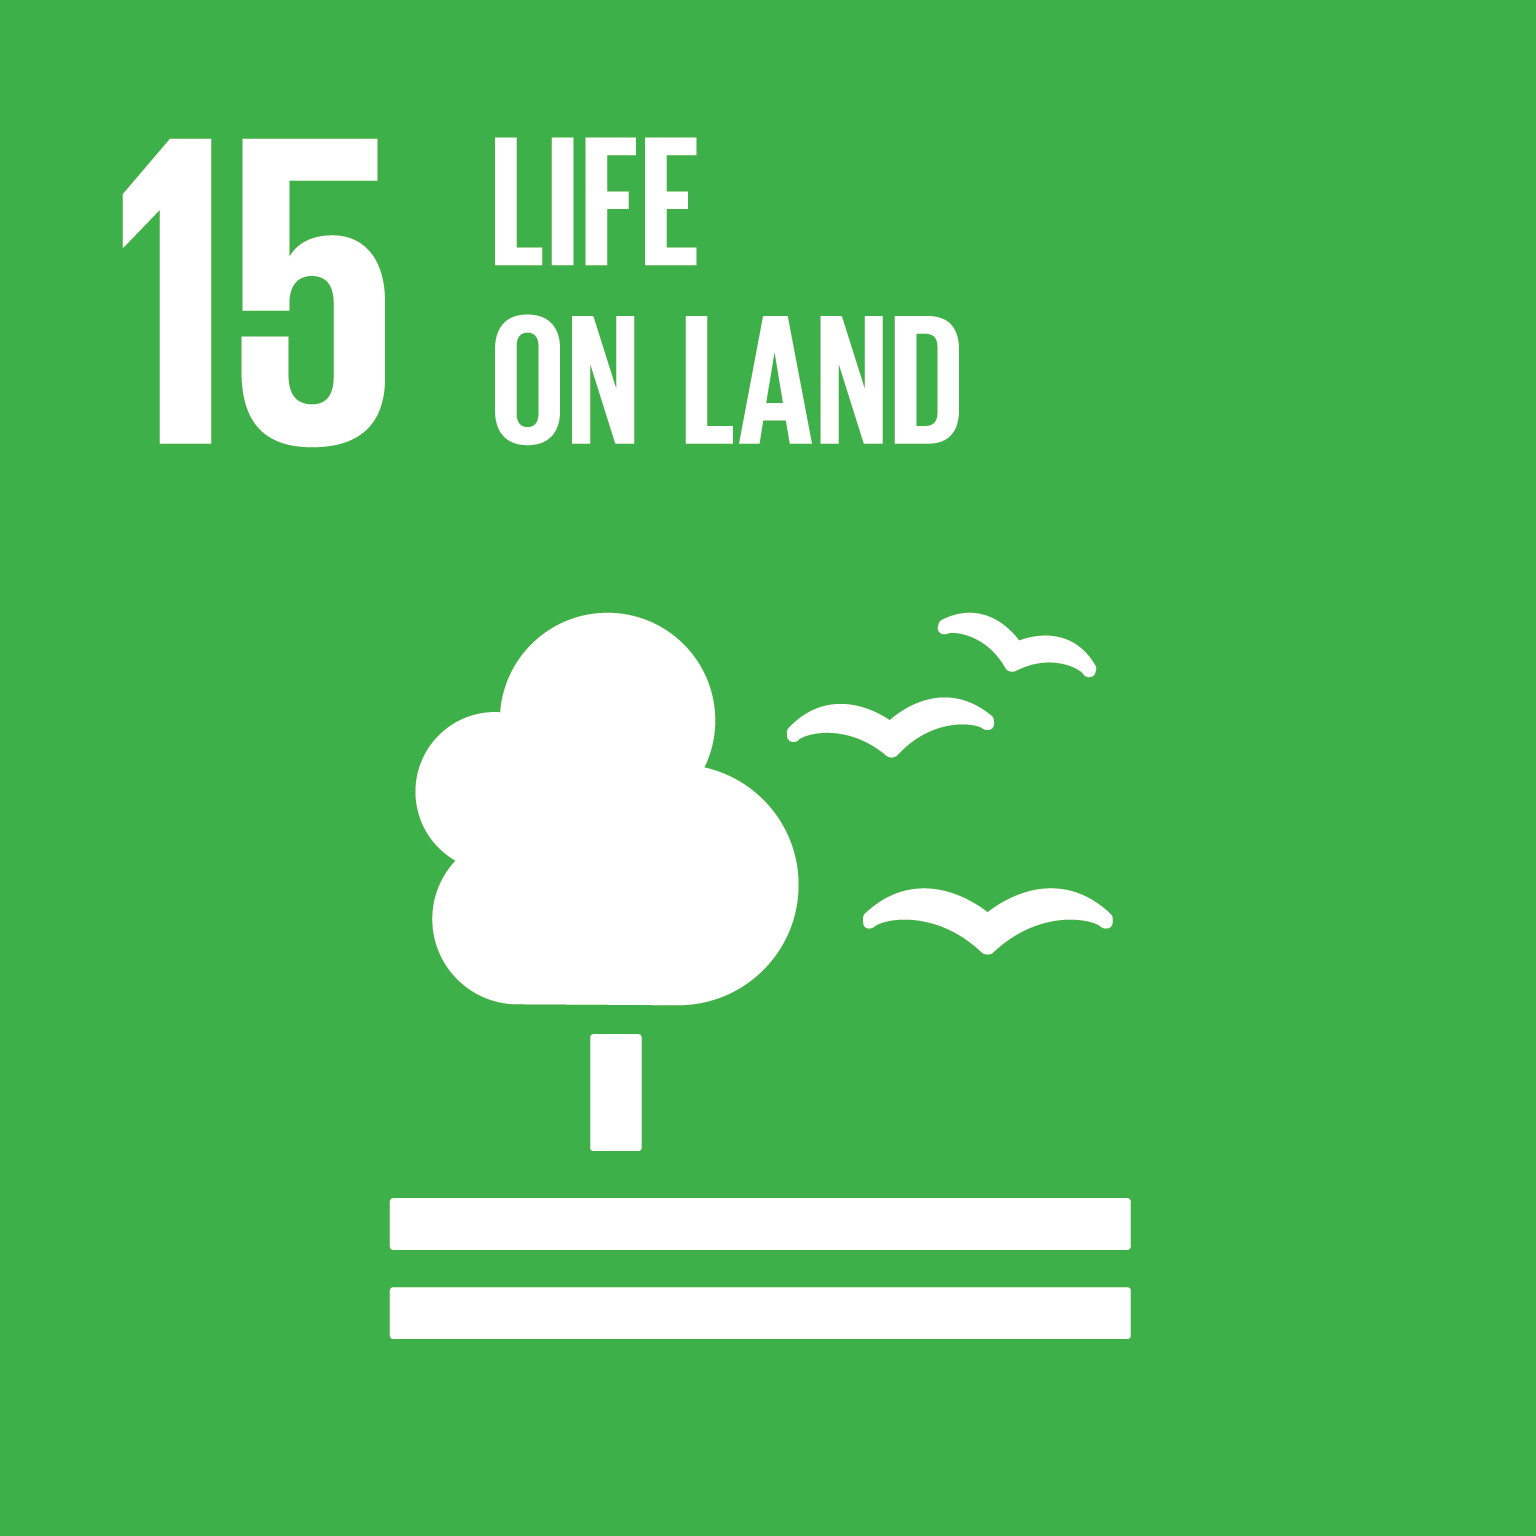 Protect, restore and promote sustainable use of terrestrial ecosystems, sustainably manage forests, combat desertification, and halt and reverse land degradation and halt biodiversity loss